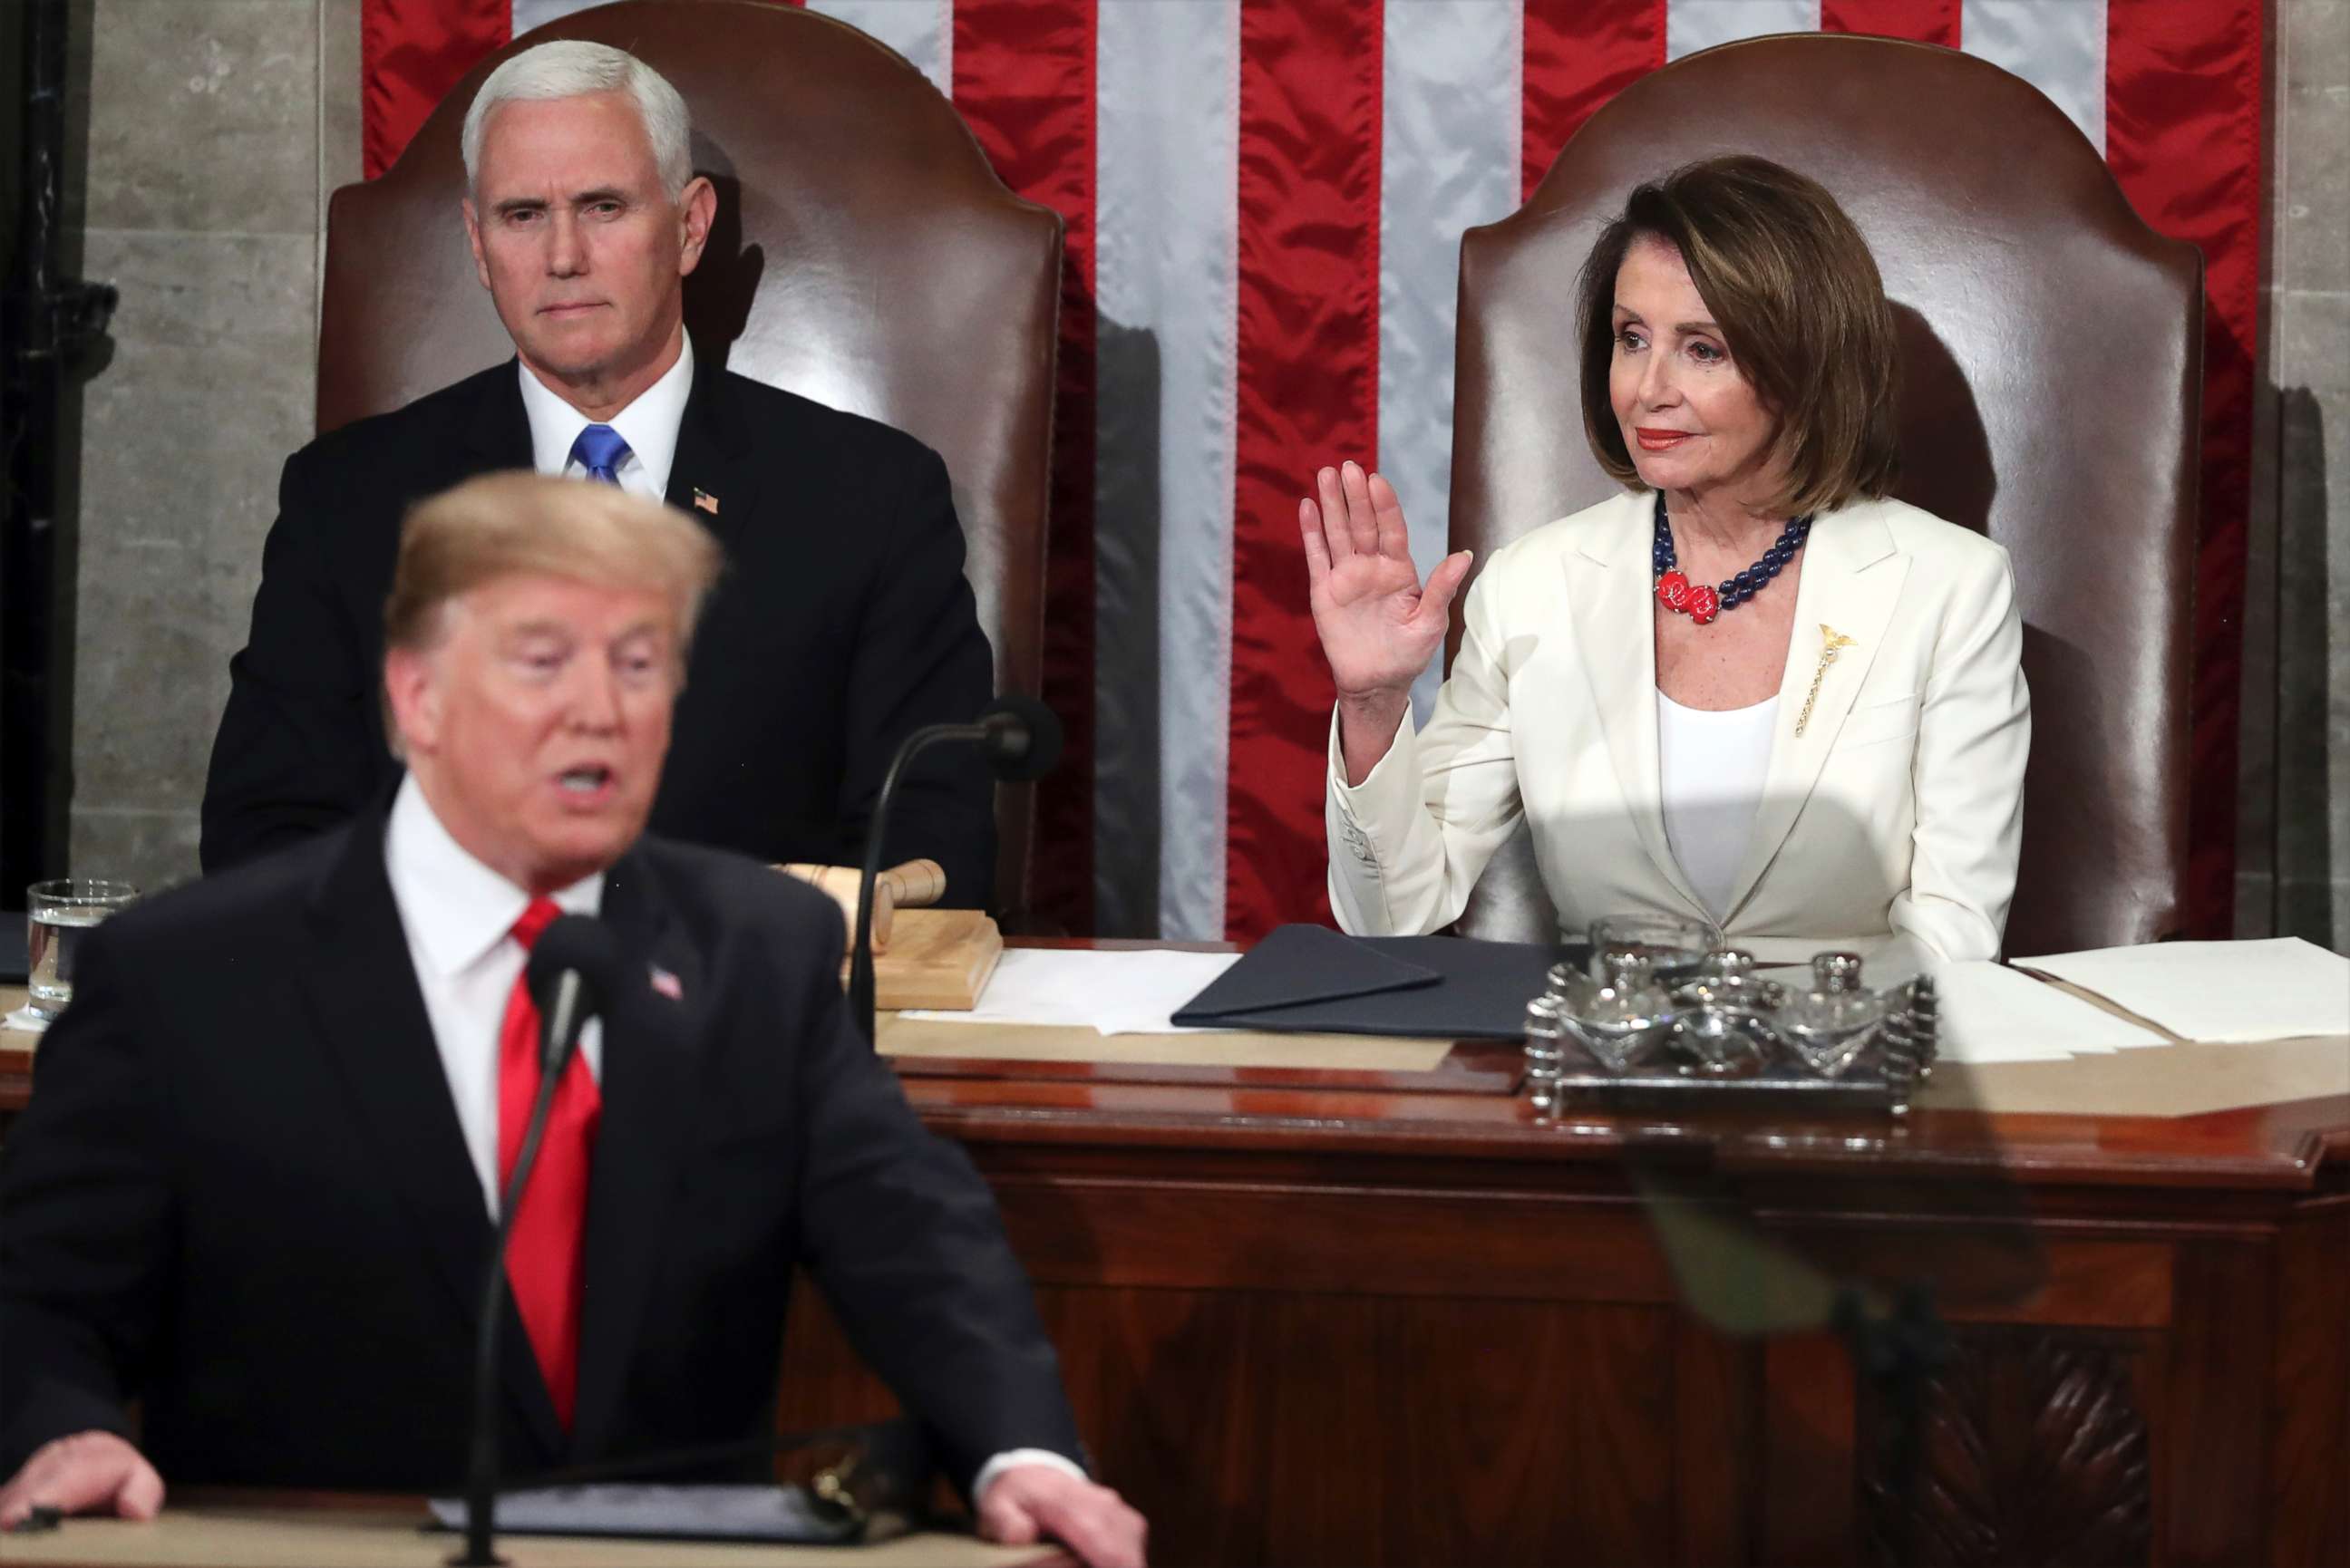 PHOTO: Speaker of the House Nancy Pelosi raises her hand in a gesture to quiet the Democrats as President Donald Trump delivers his State of the Union address to a joint session of Congress on Capitol Hill in Washington, Feb. 5, 2019.